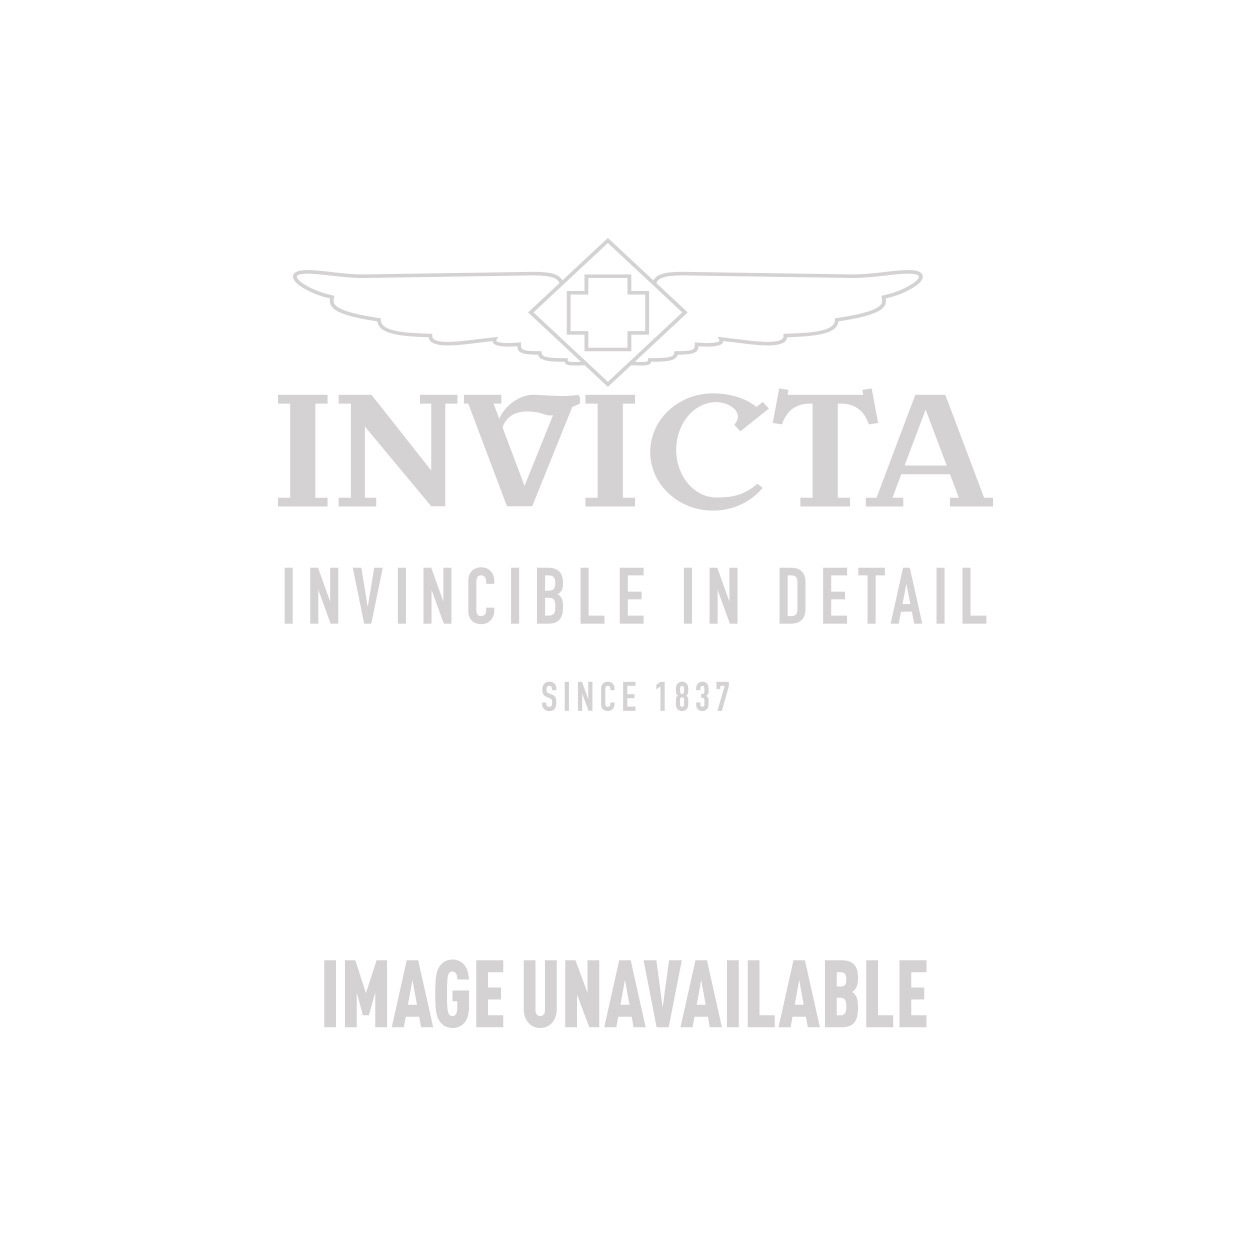 Invicta Specialty Quartz Watch Rose Gold Stainless Steel - Model 1271